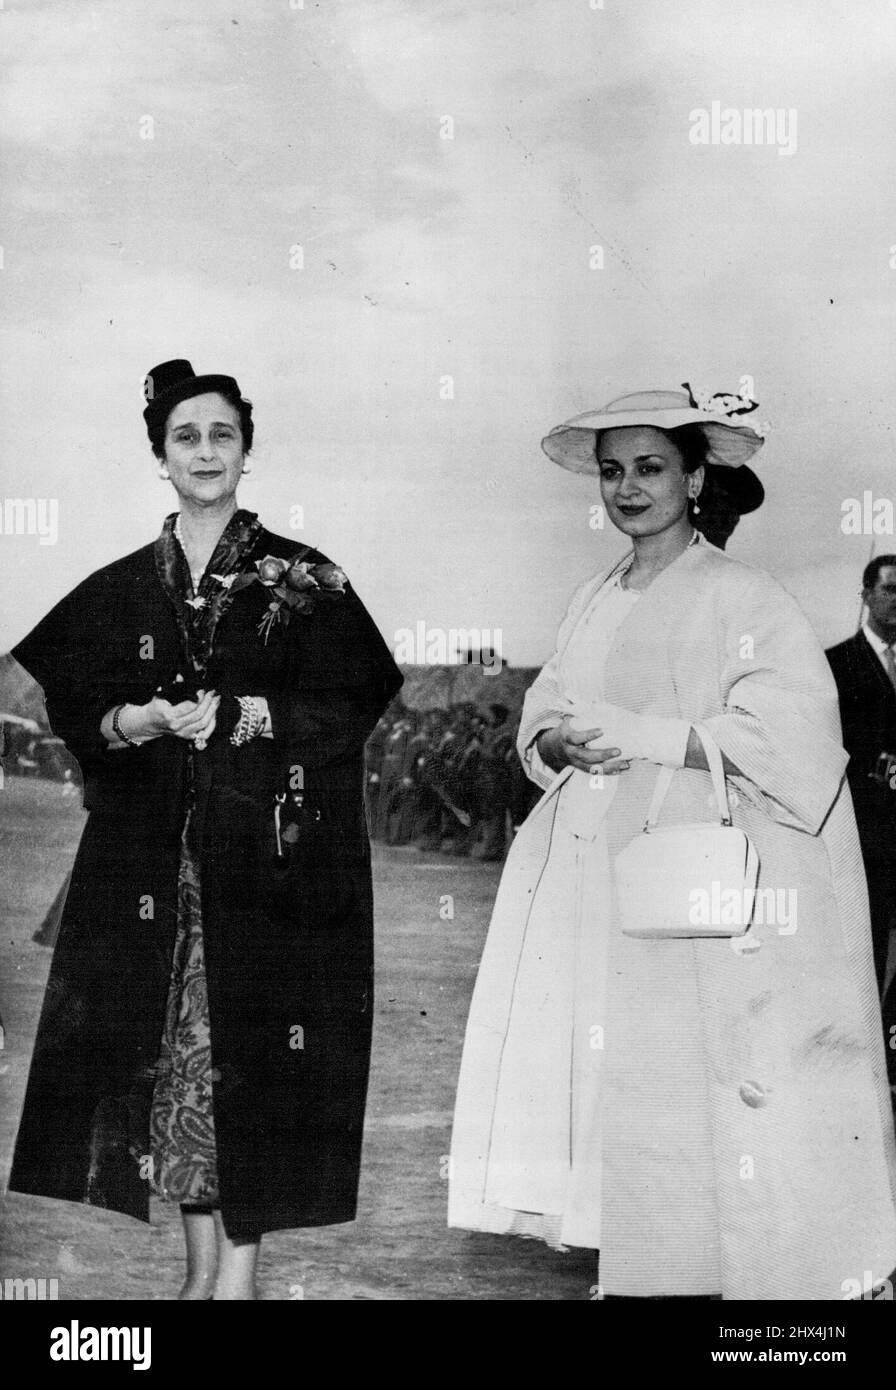 King Hussein Visits Spain -- Queen Dina (right) on arrival at Barajas Airport yesterday with king Hussein where they were met by general Franco and his wife. King Hussein and Queen Dina of Jordan, where met by general Franco when they arrived at Barajas Airport, Madrid, yesterday for a short visit to that country. The King and Queen will be visiting Britain later next week. June 08, 1955. (Photo by Paul Popper, Paul Popper Ltd. ). Stock Photo